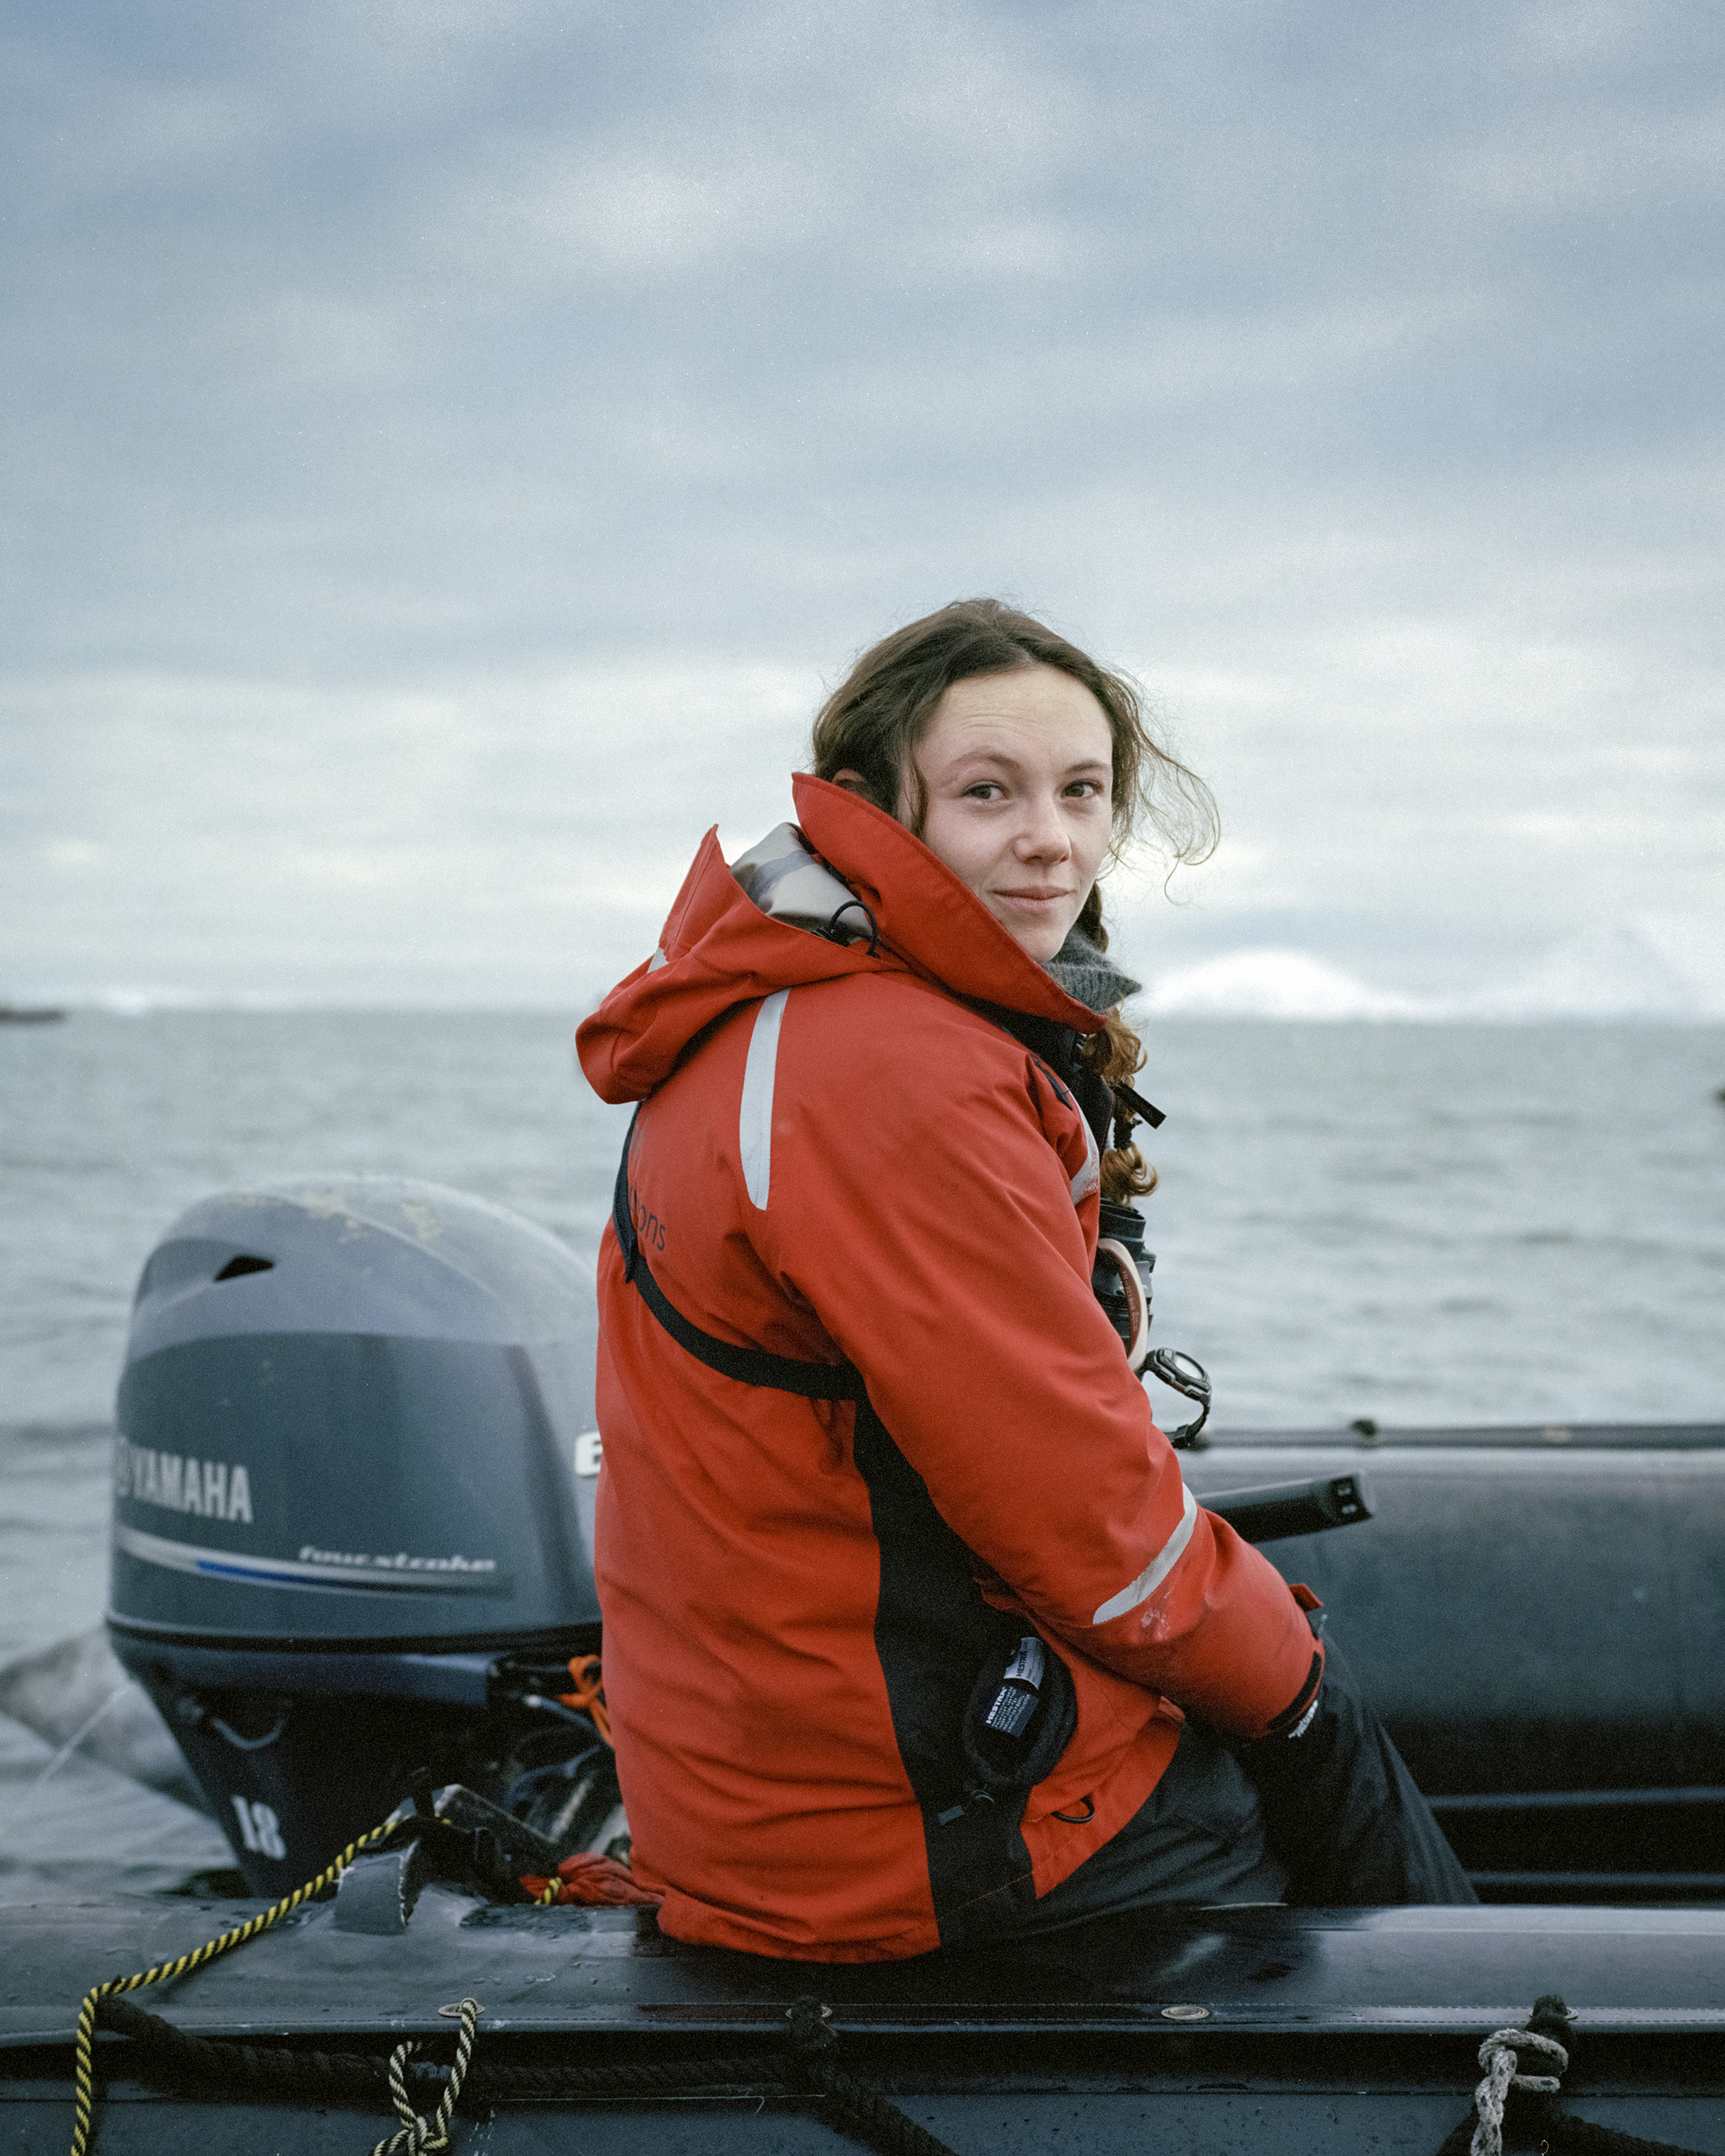 Justine Ryan, Polar historian and expedition guide from England, prepares her zodiac in Antarctica.